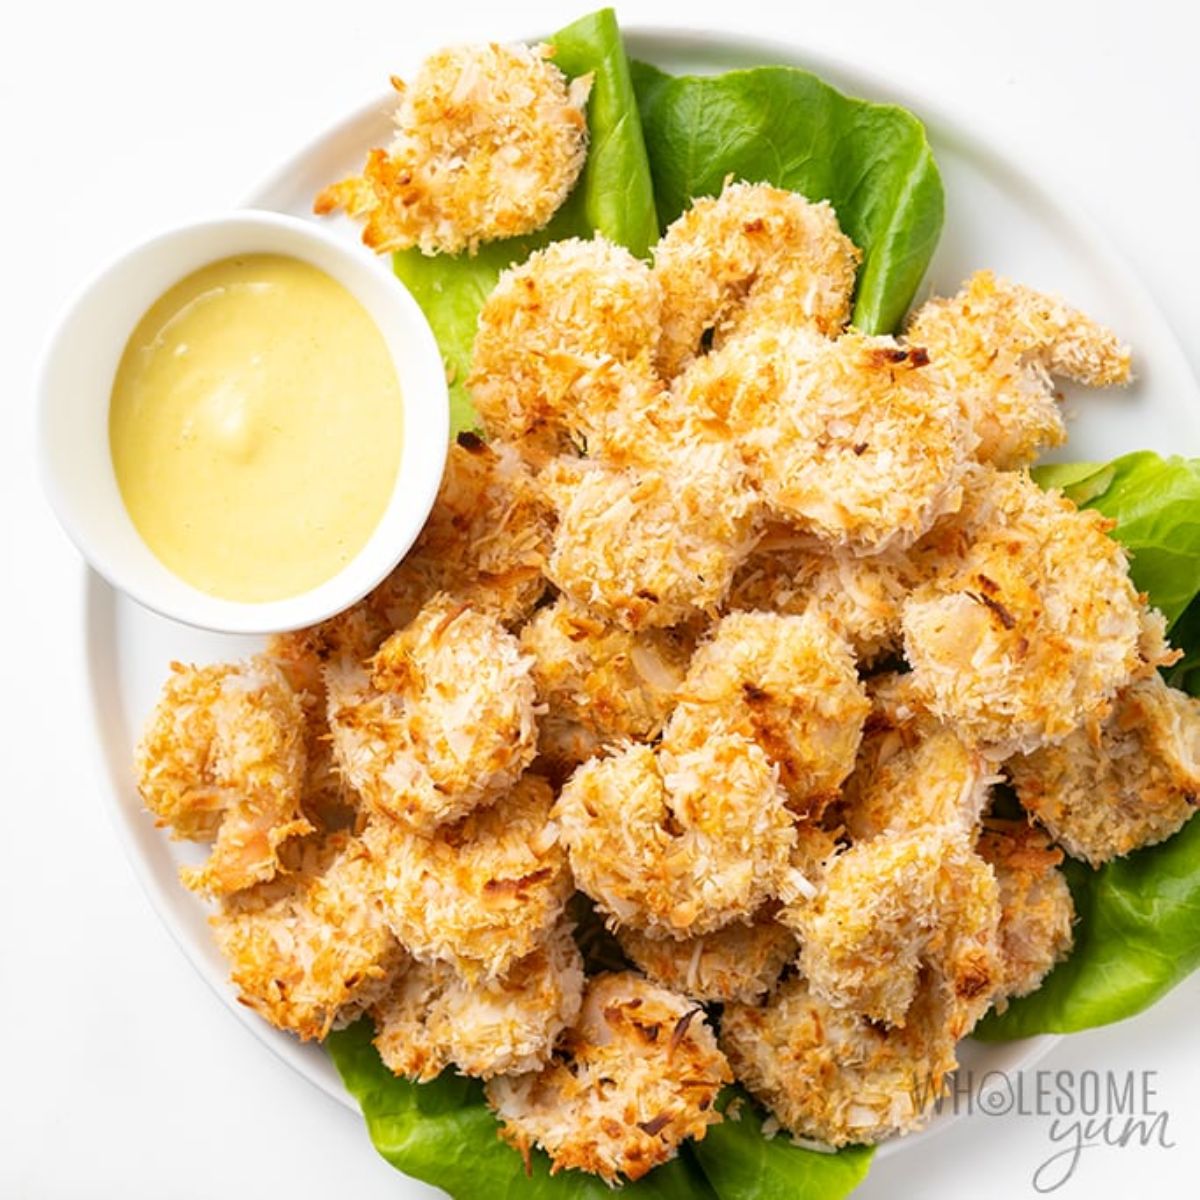 A plate of coconut shrimp on a bed of lettuce leaves with a white pot of dip to the side